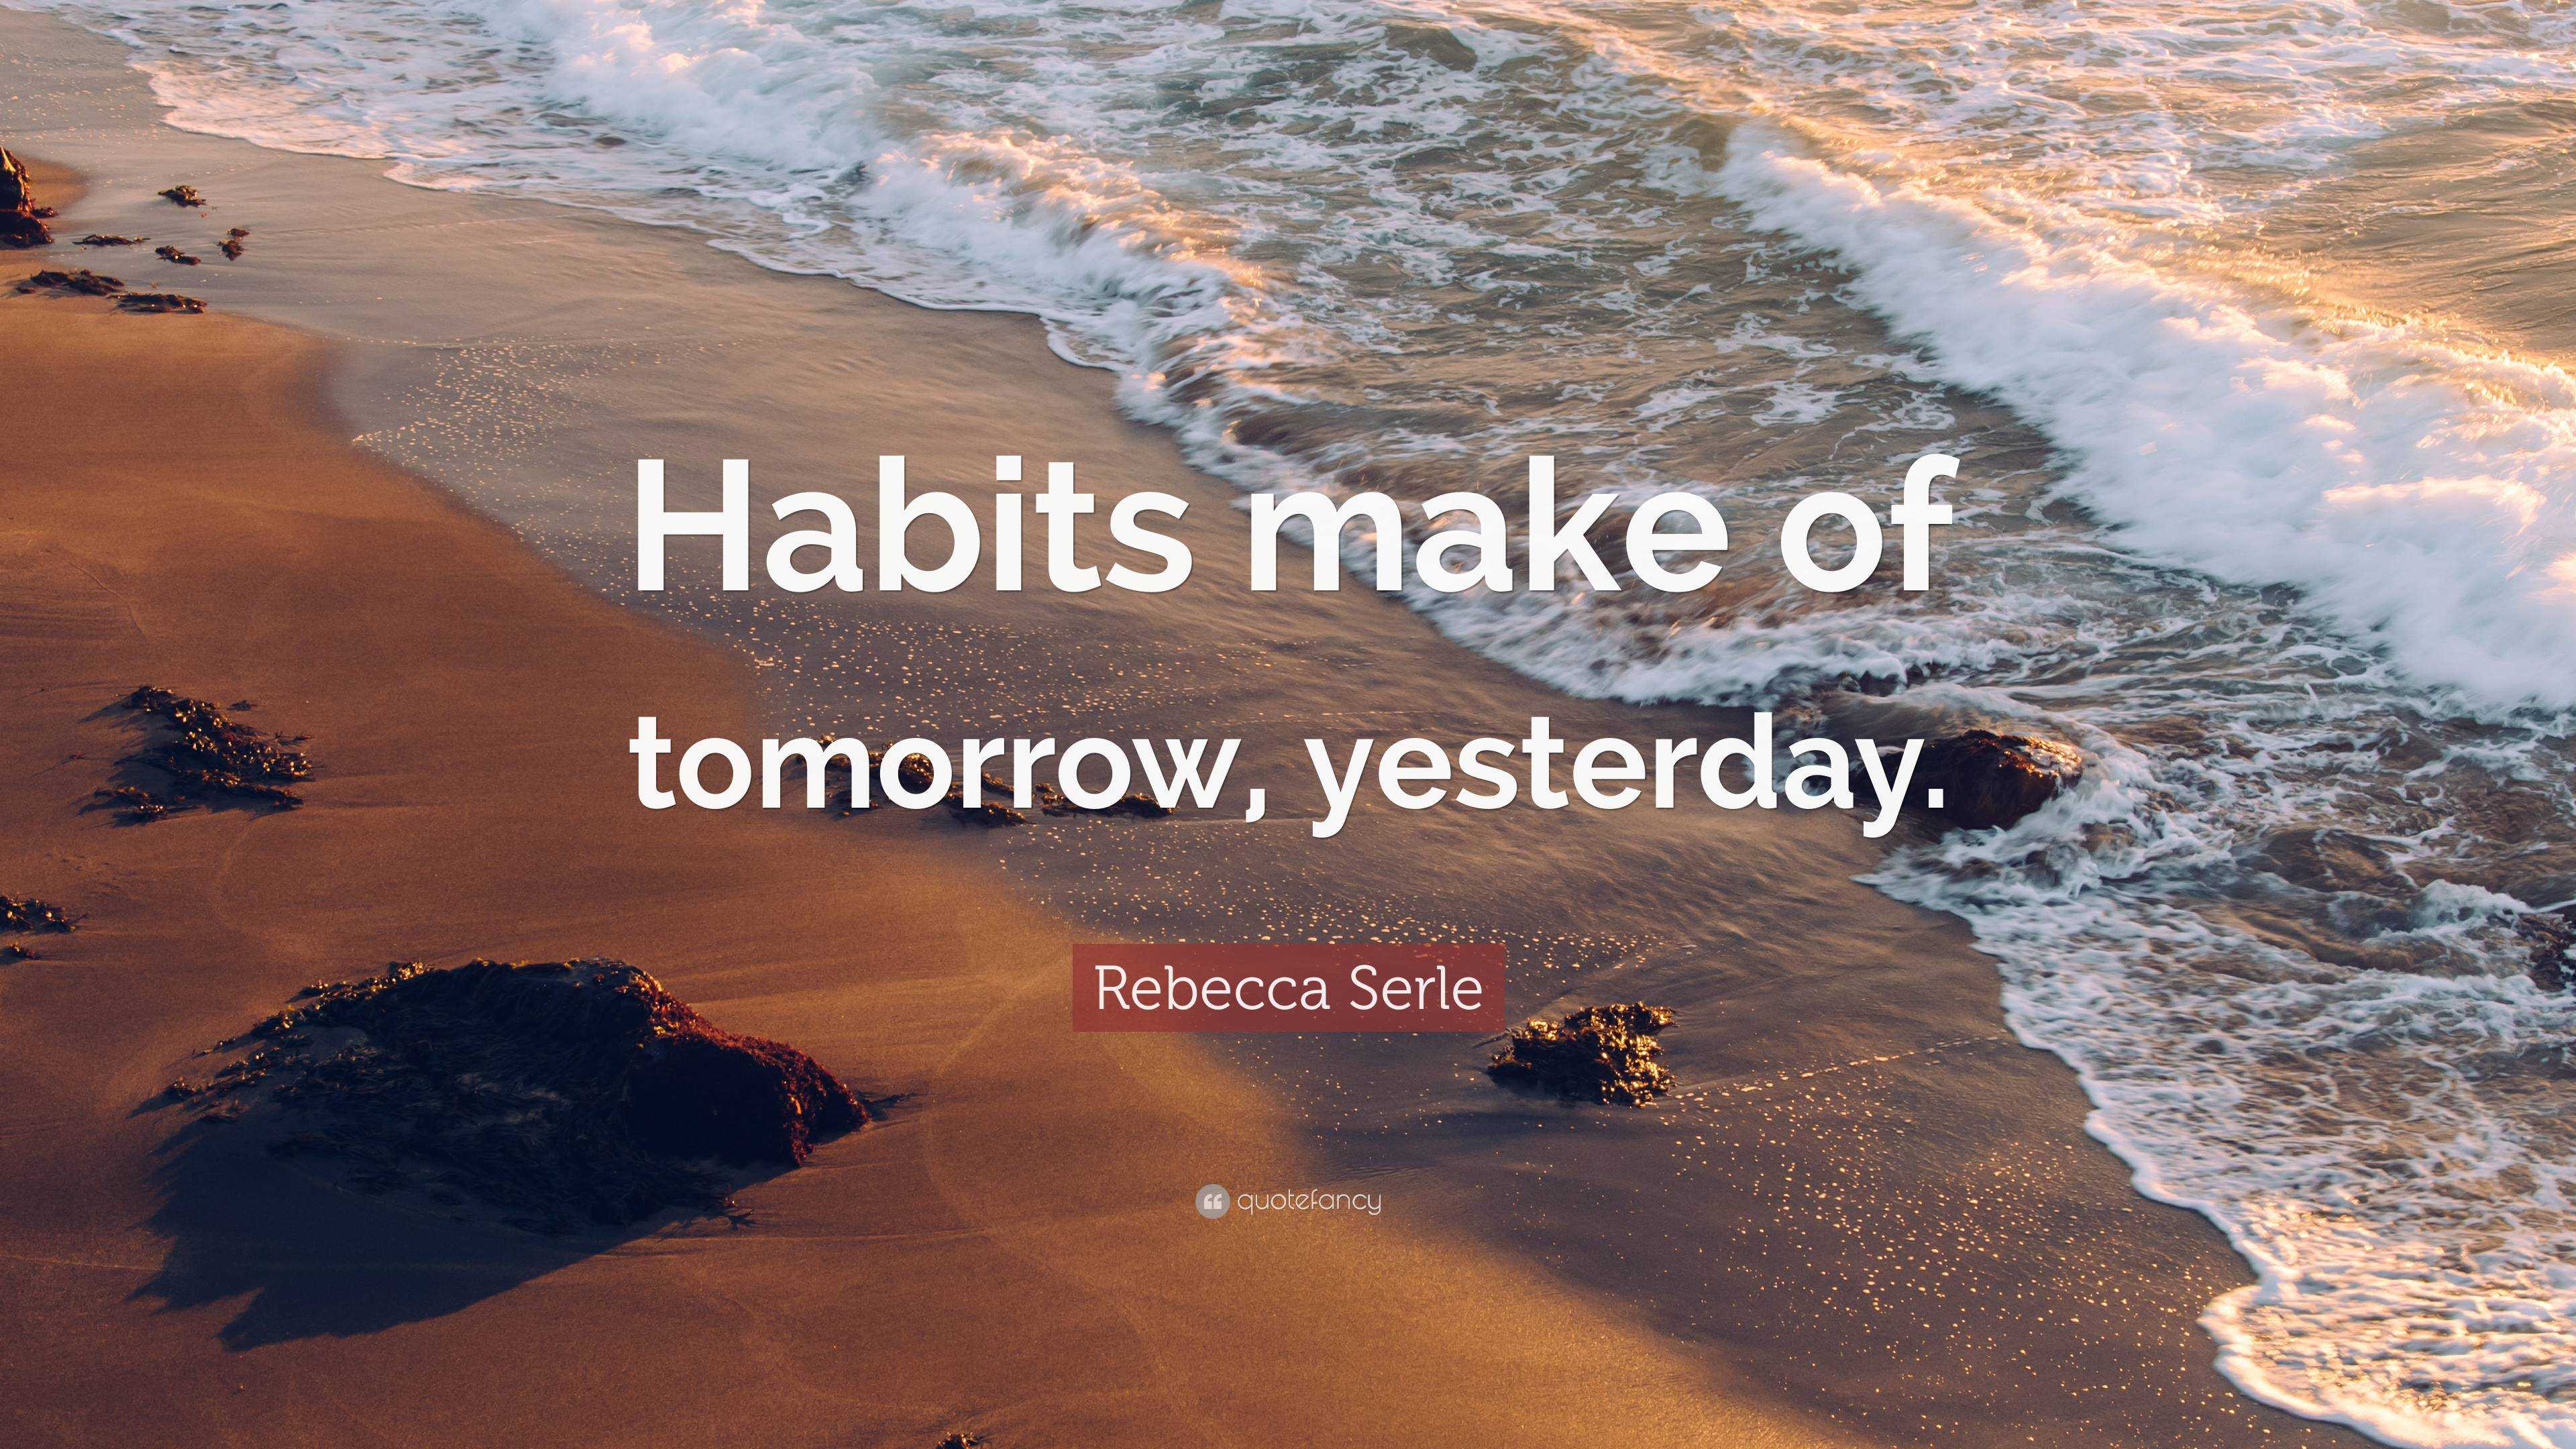 Rebecca Serle Quote: “Habits make of tomorrow, yesterday.”